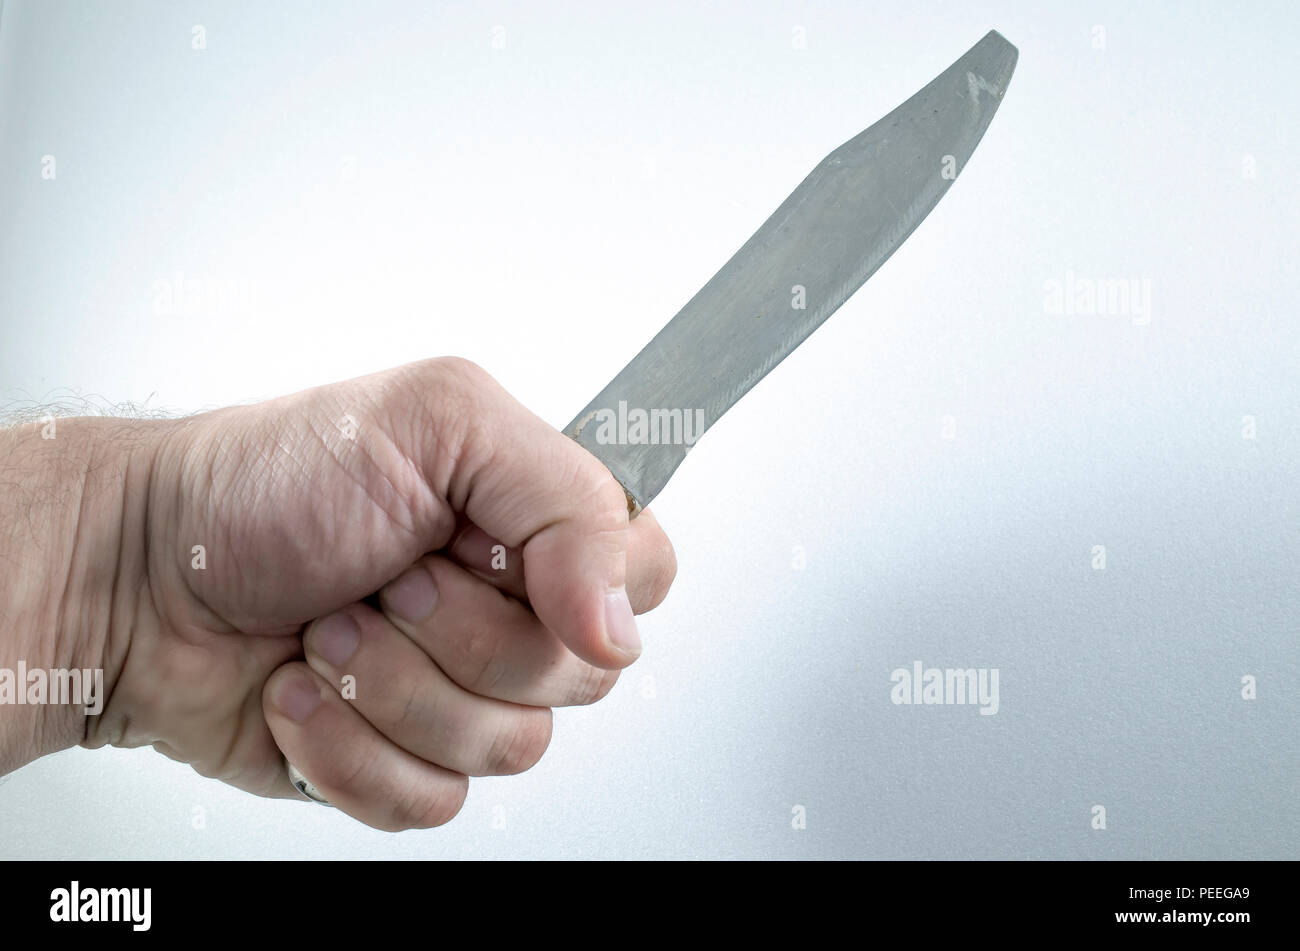 The hand holds a knife, the weapon of crime. Photo for a criminal article Stock Photo